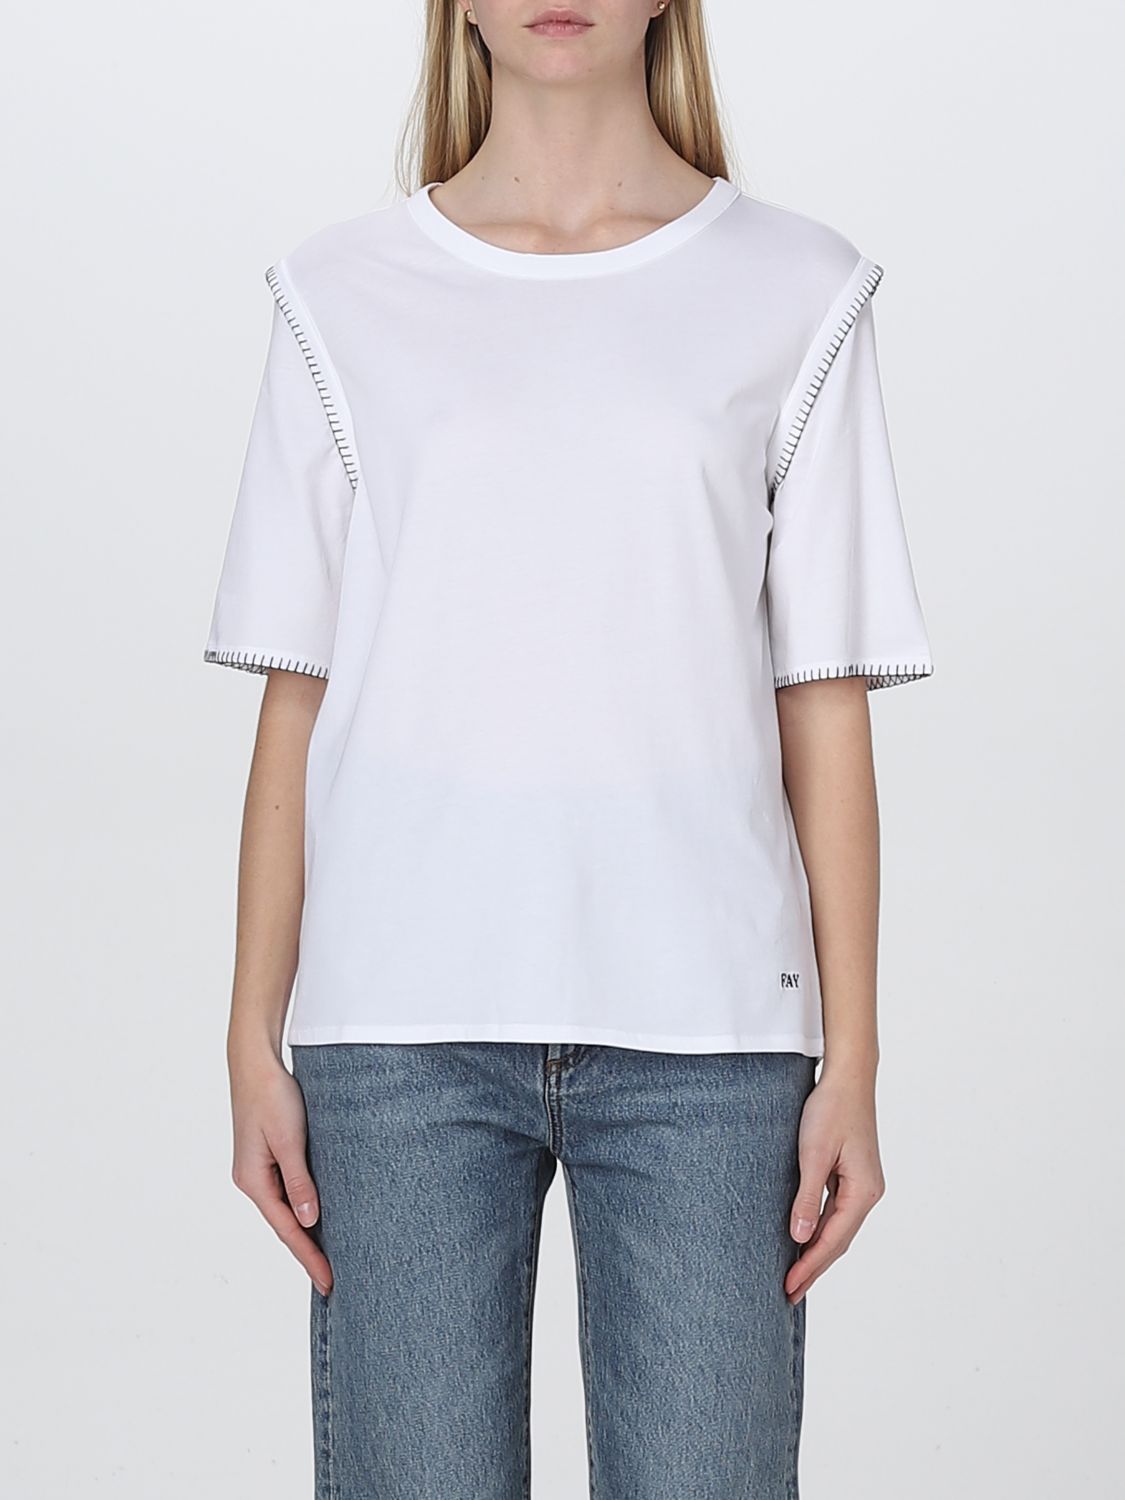 FAY T-SHIRT FAY WOMAN COLOR WHITE,D93294001